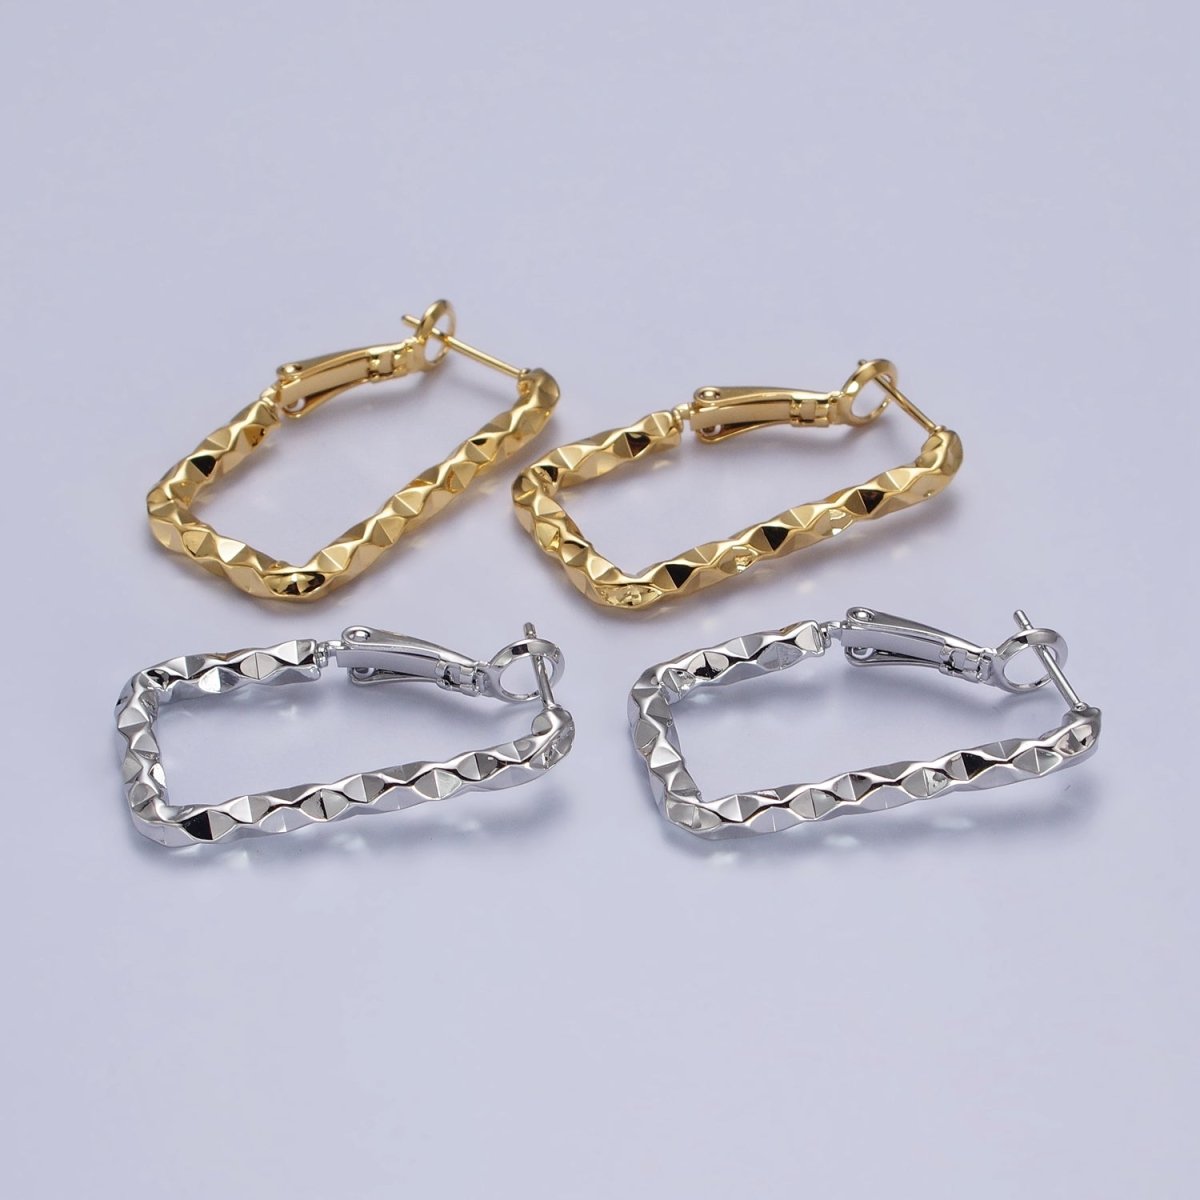 16K Gold Filled U-Shaped 30mm, 40mm Dented Geometric Hinge Hoop Earrings in Gold & Silver | AB143 AB187, AD800 AD801 - DLUXCA